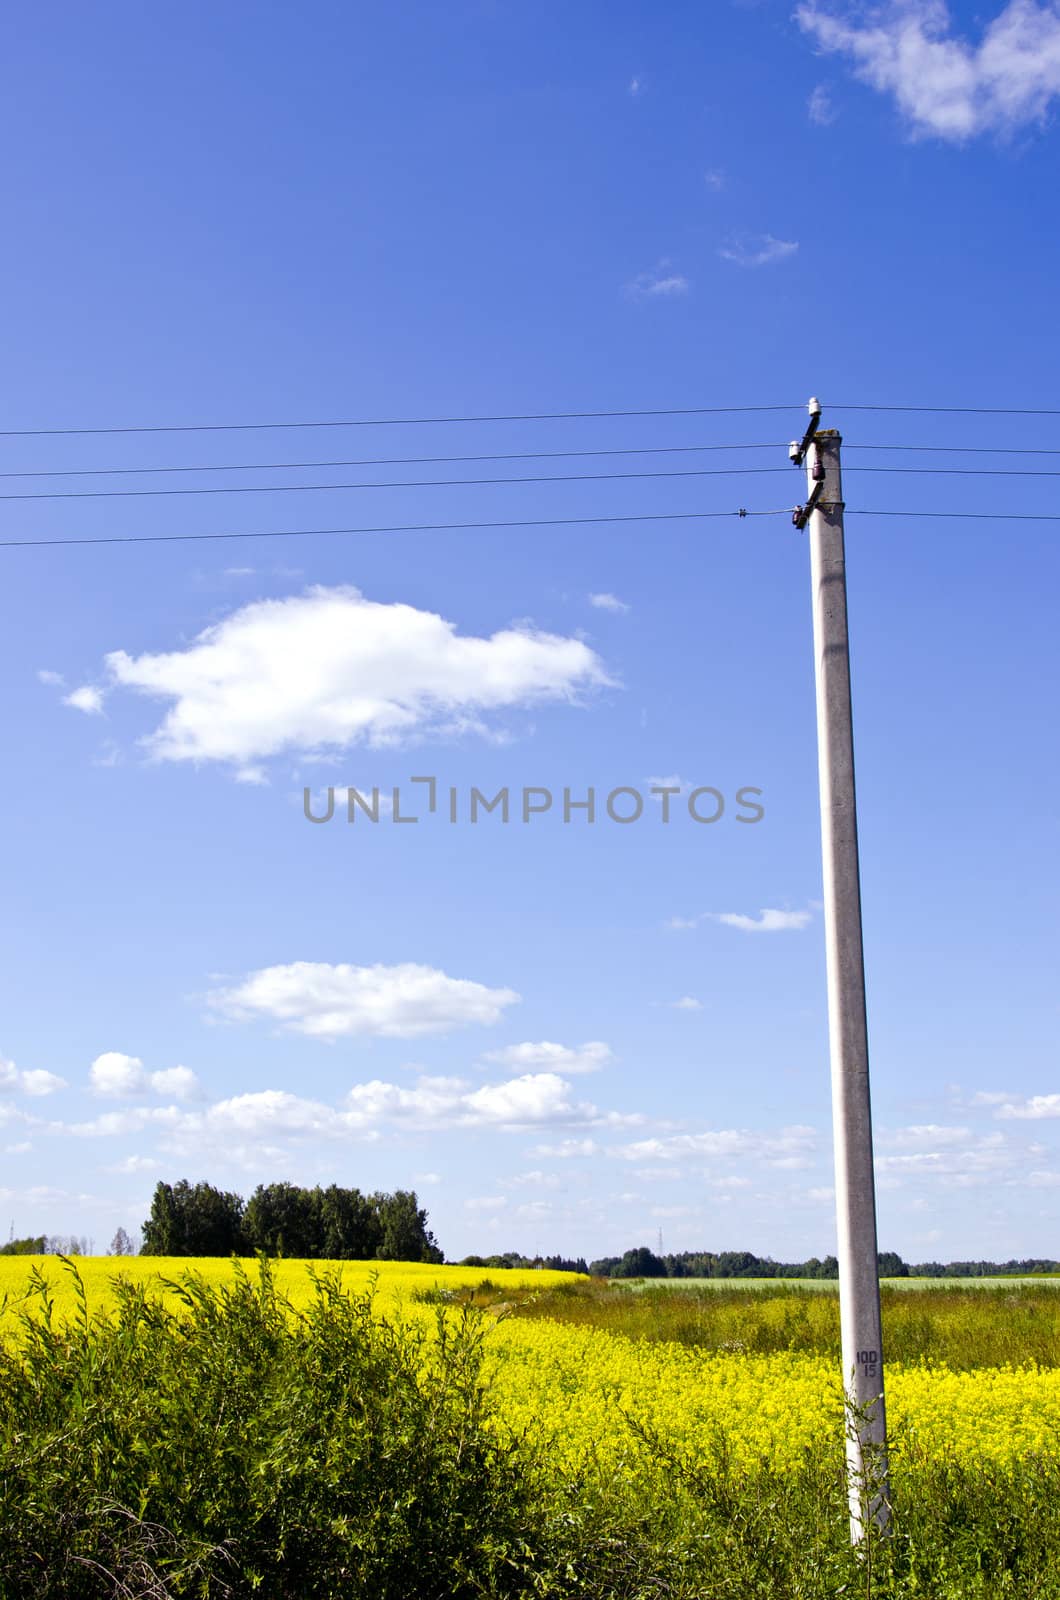 background of agricultural rapeseed fields and concrete electricity pole on background of blue sky.